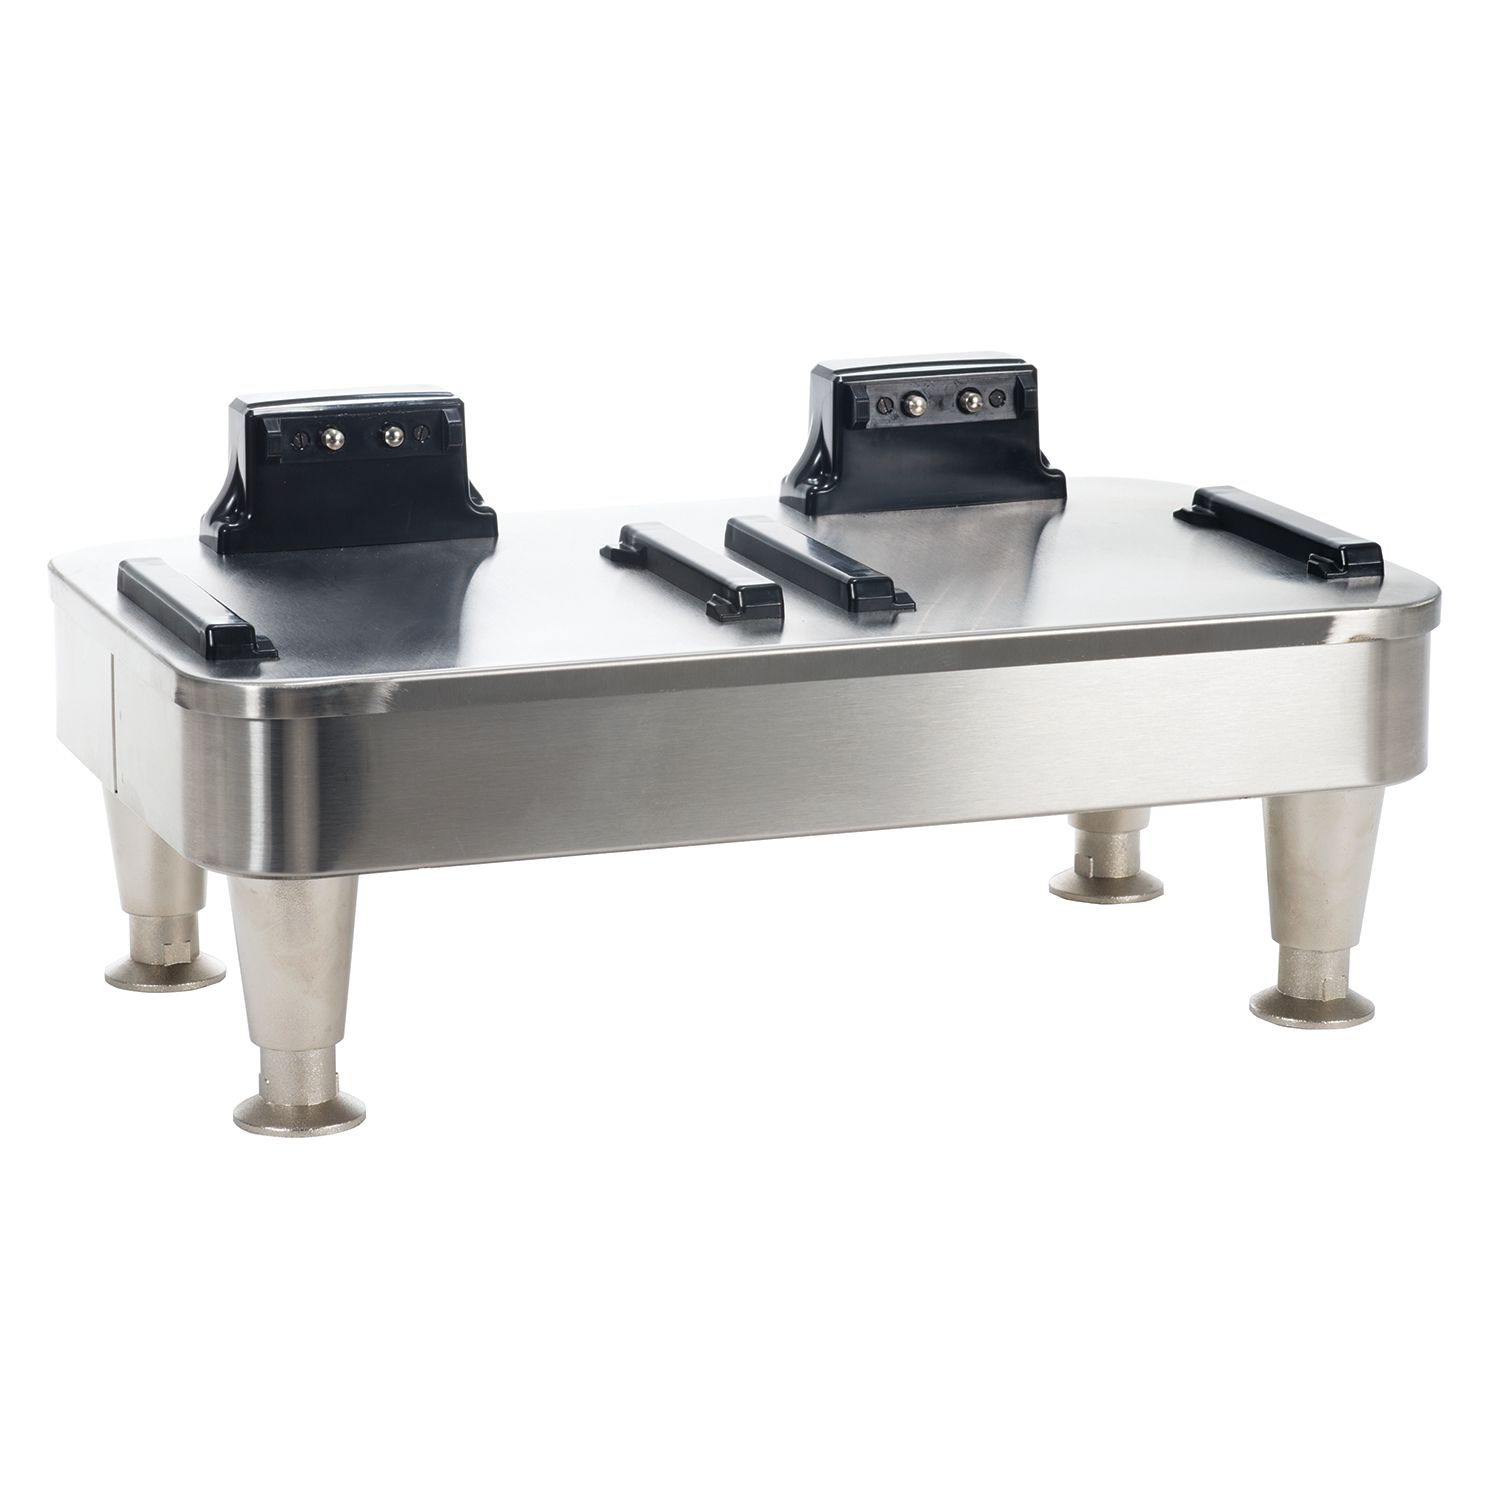 2SH STAND, 120V INF SERIES - Serving & Holding - BUNN Commercial Site